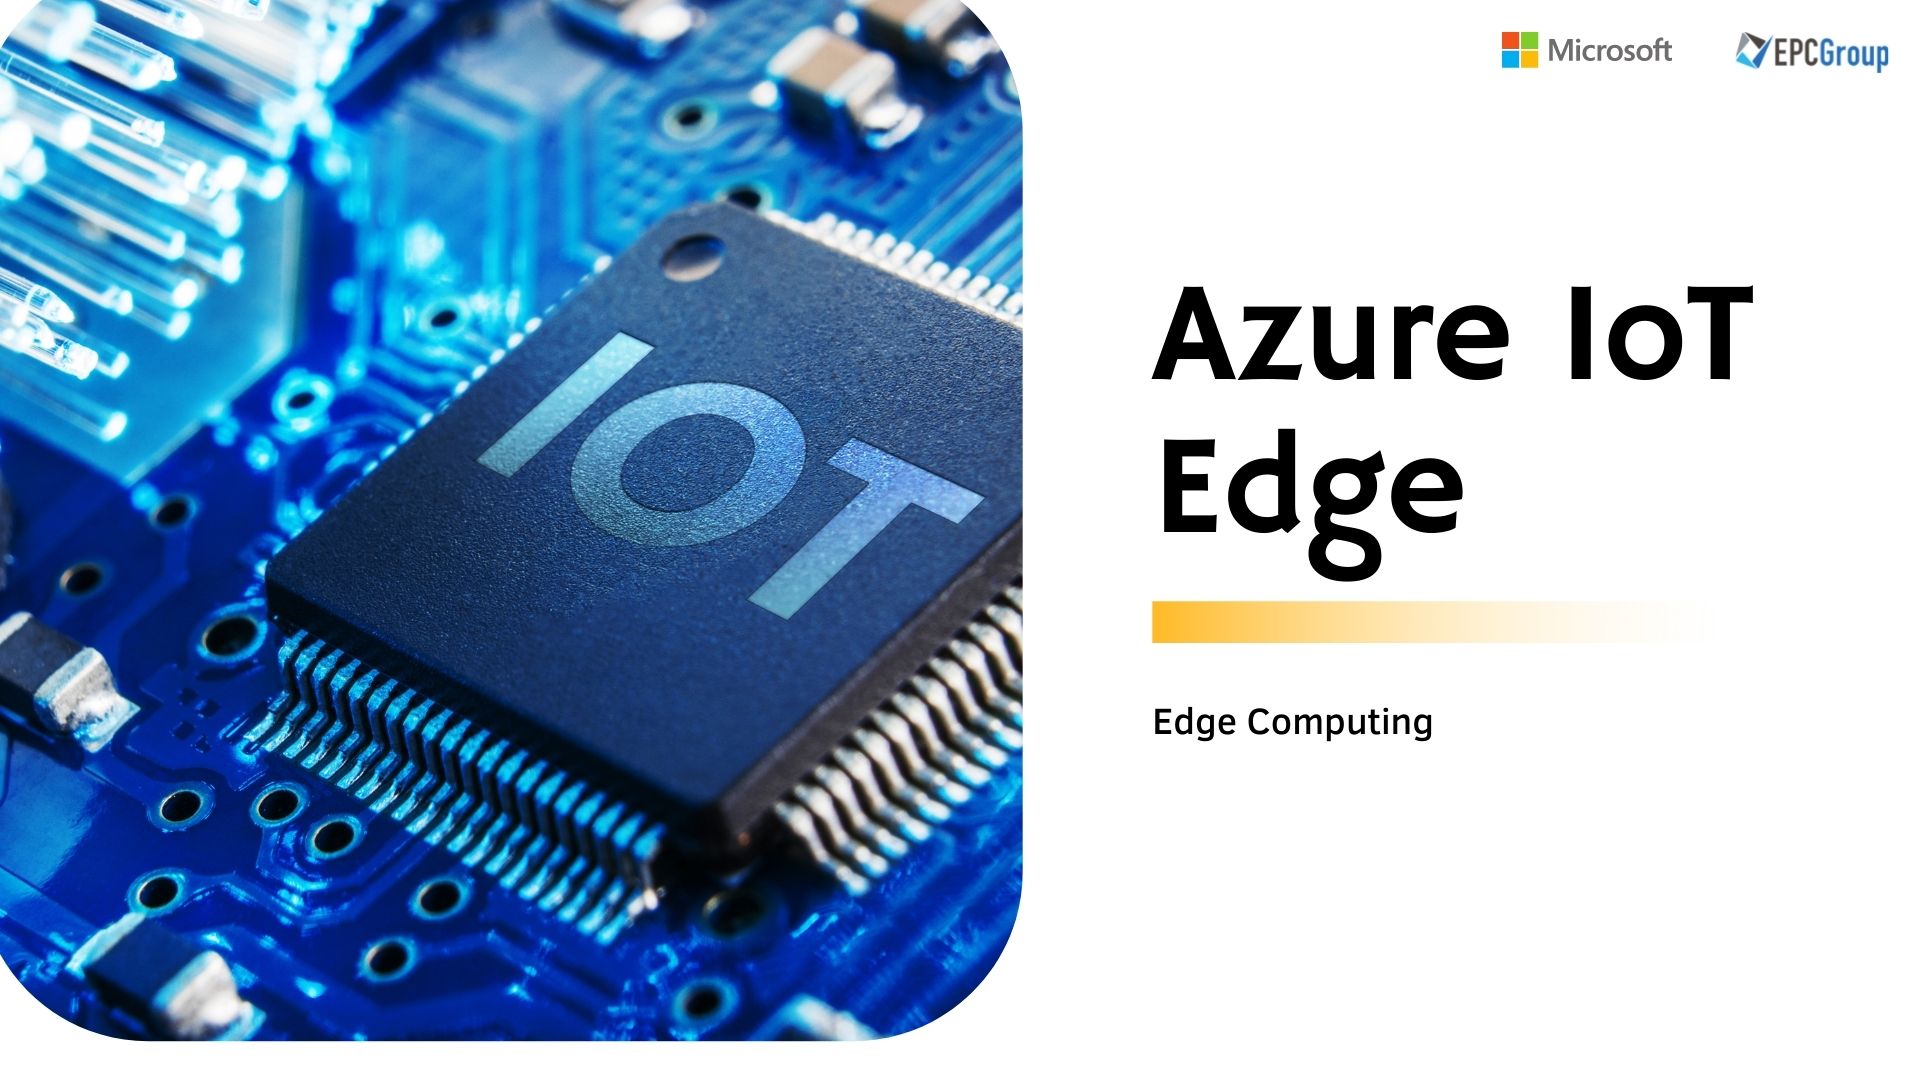 Azure IoT Edge Pricing And Features: IoT Solution For Edge Computing